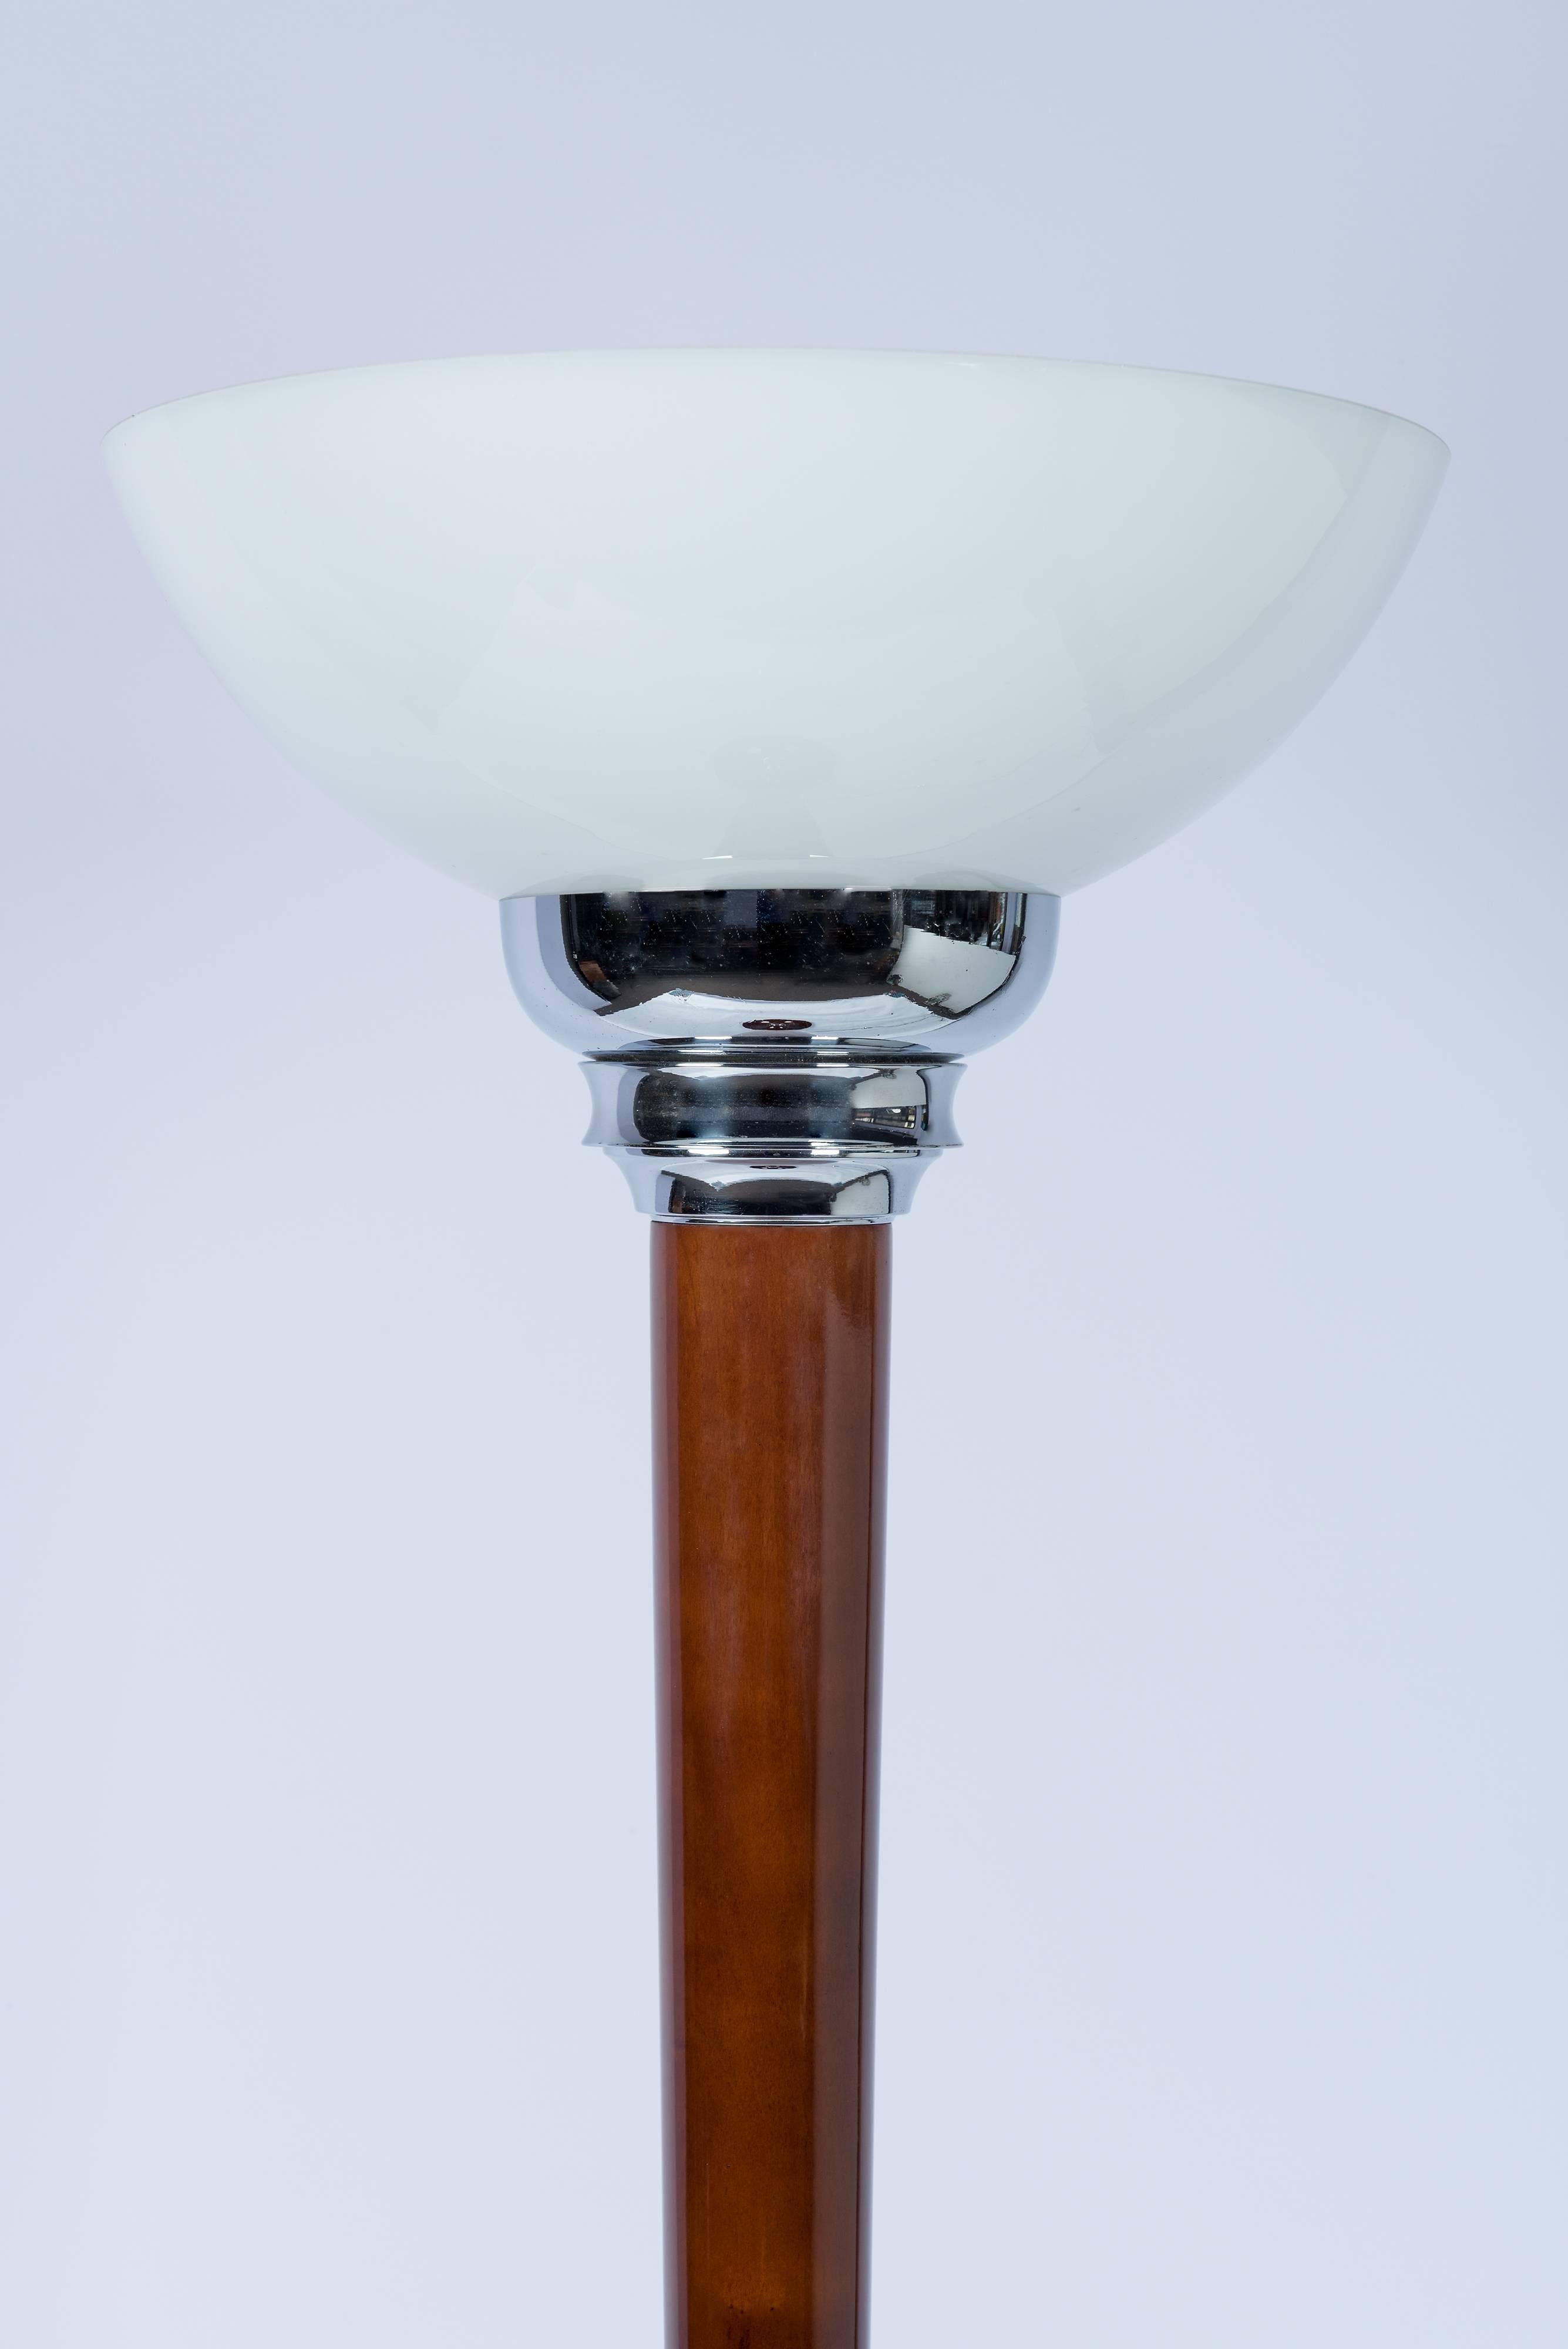 1930s French origin Art Deco floor lamp.
Walnut tinted wood re-polished with a lustrous handmade French polish. Chrome-plated metal elements. White coloured glass shade.
     